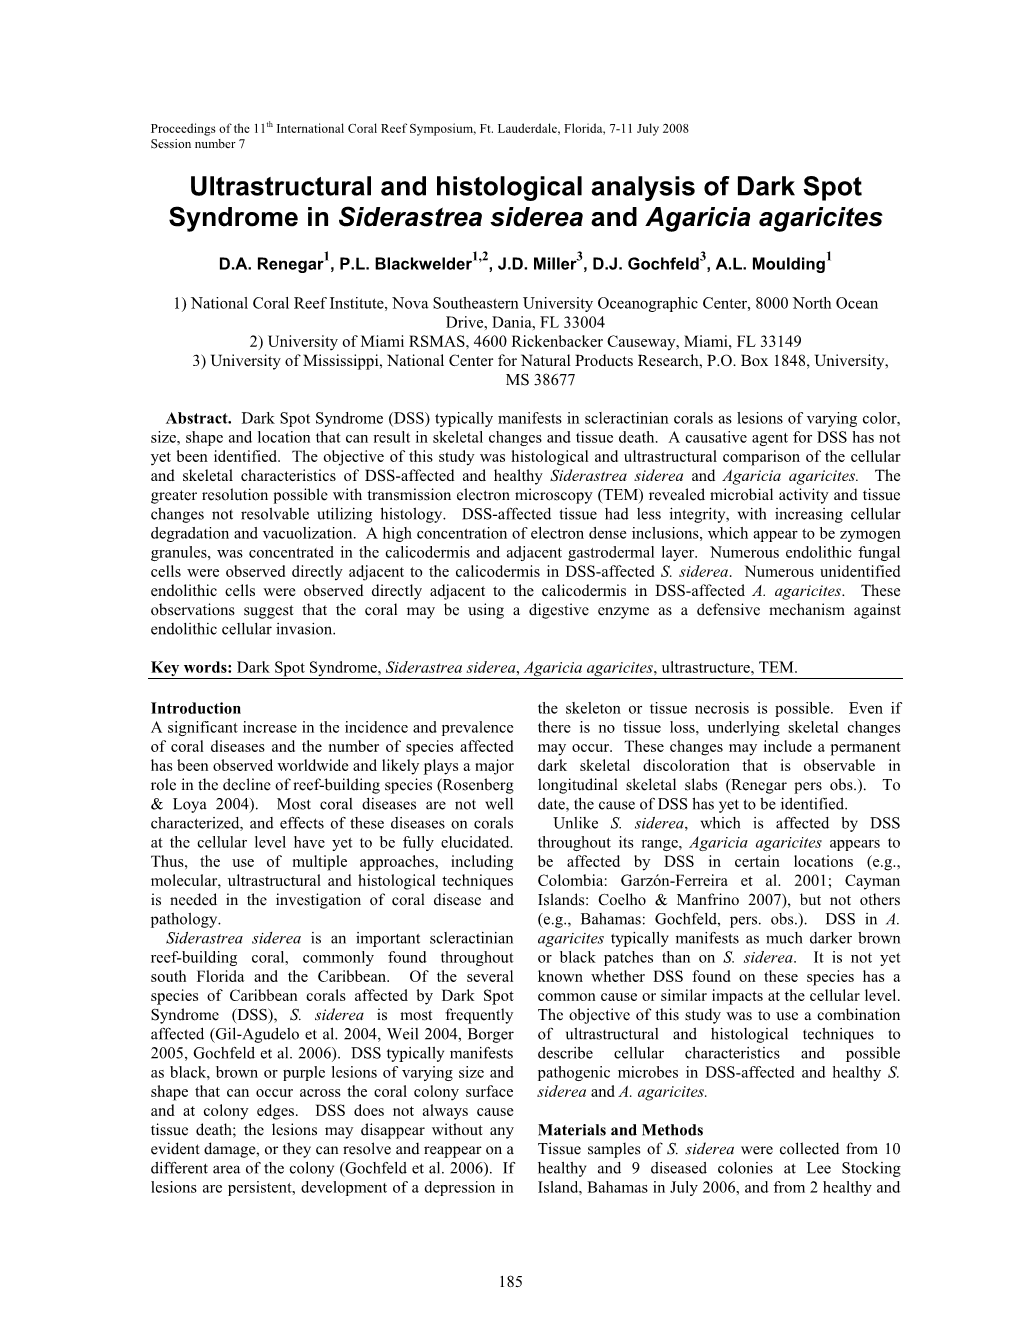 Ultrastructural and Histological Analysis of Dark Spot Syndrome in Siderastrea Siderea and Agaricia Agaricites